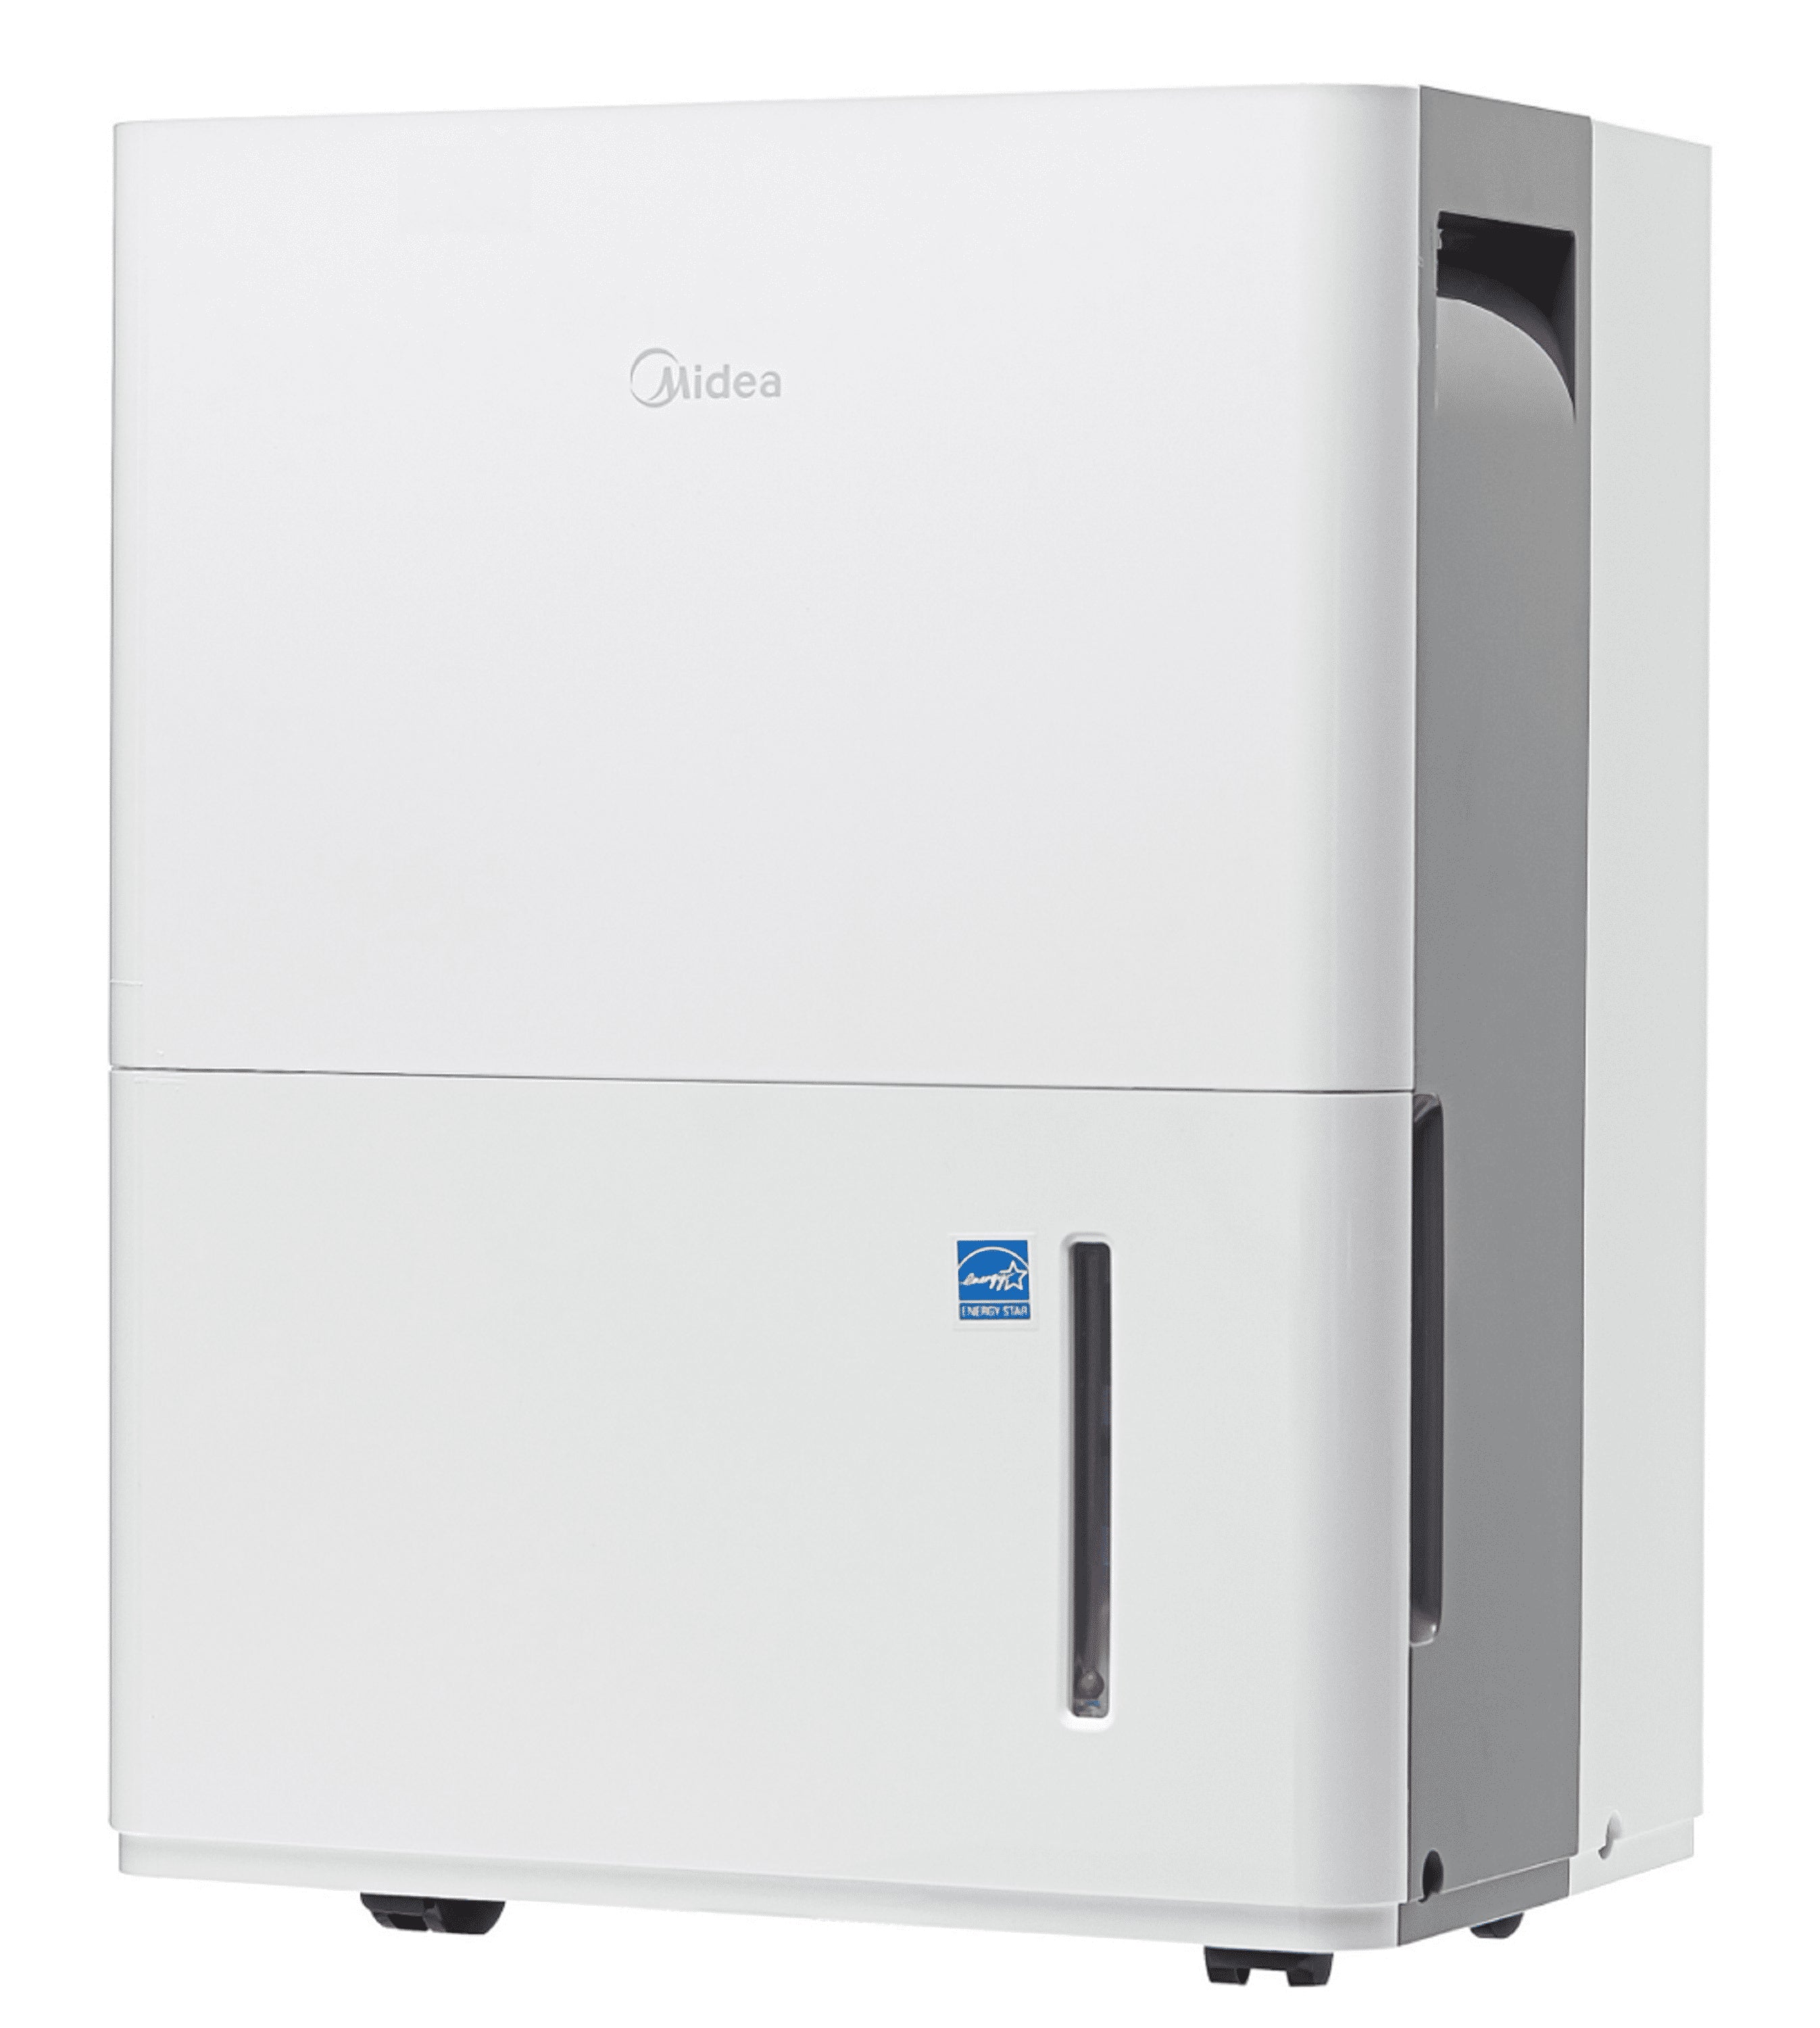 Restored Midea 22-Pint Energy Star Smart Dehumidifier for Damp Rooms, White, MAD22S1WWT (Factory Refurbished)